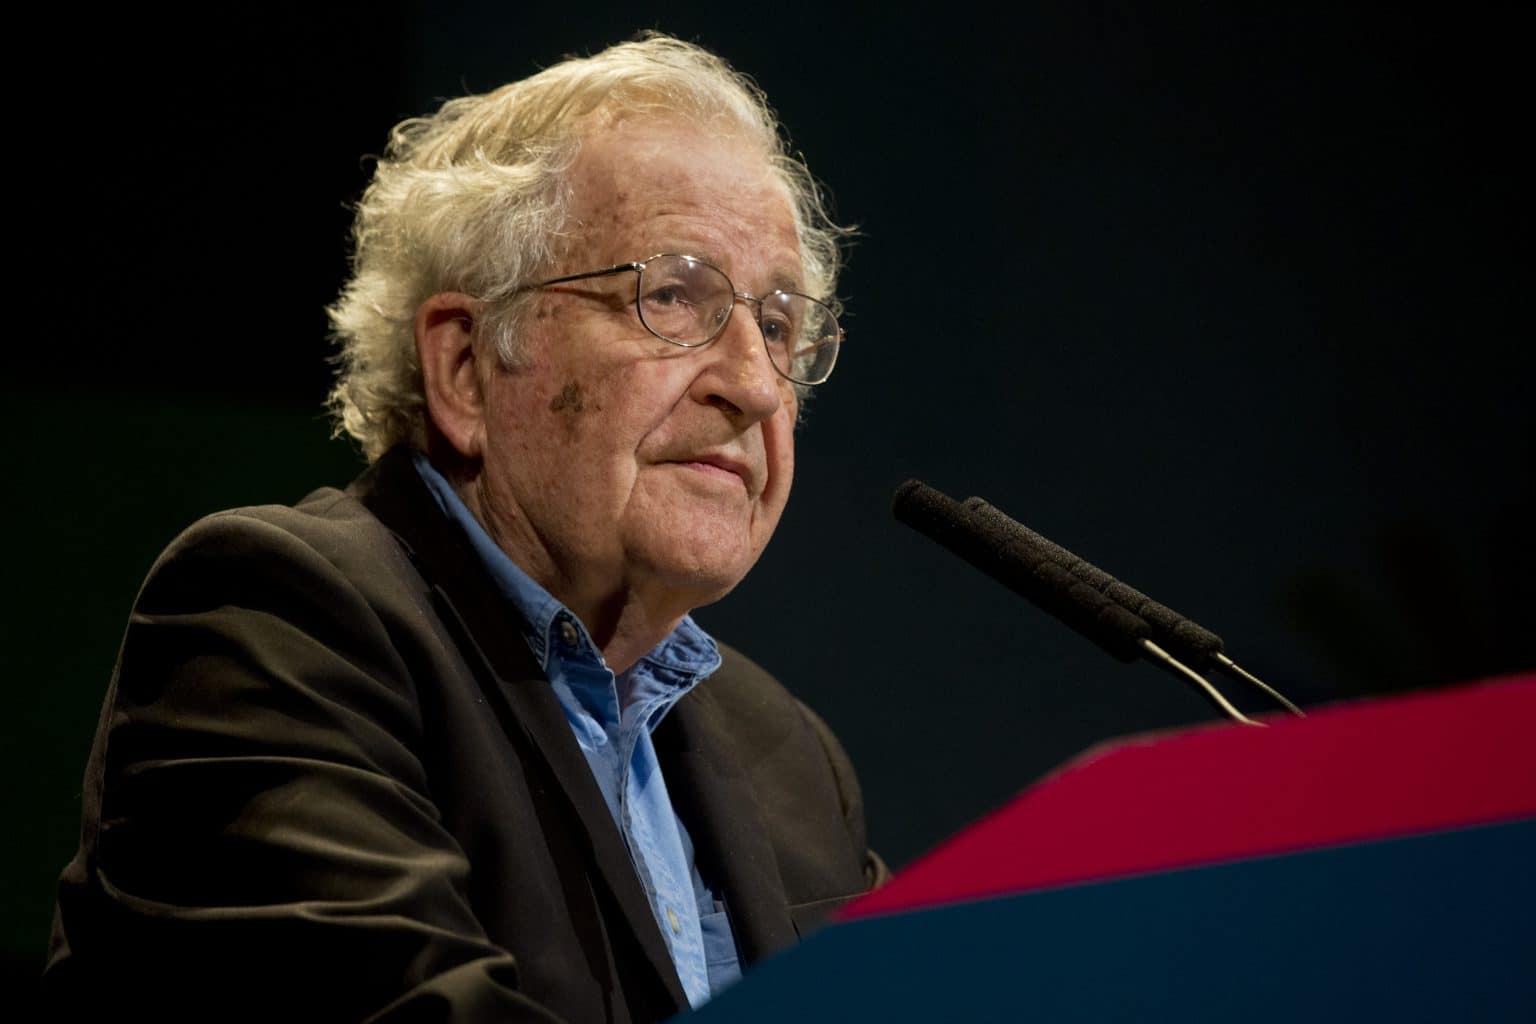 Watch: ‘Taking its most lethal form in India’ – Chomsky on rise of Islamophobia